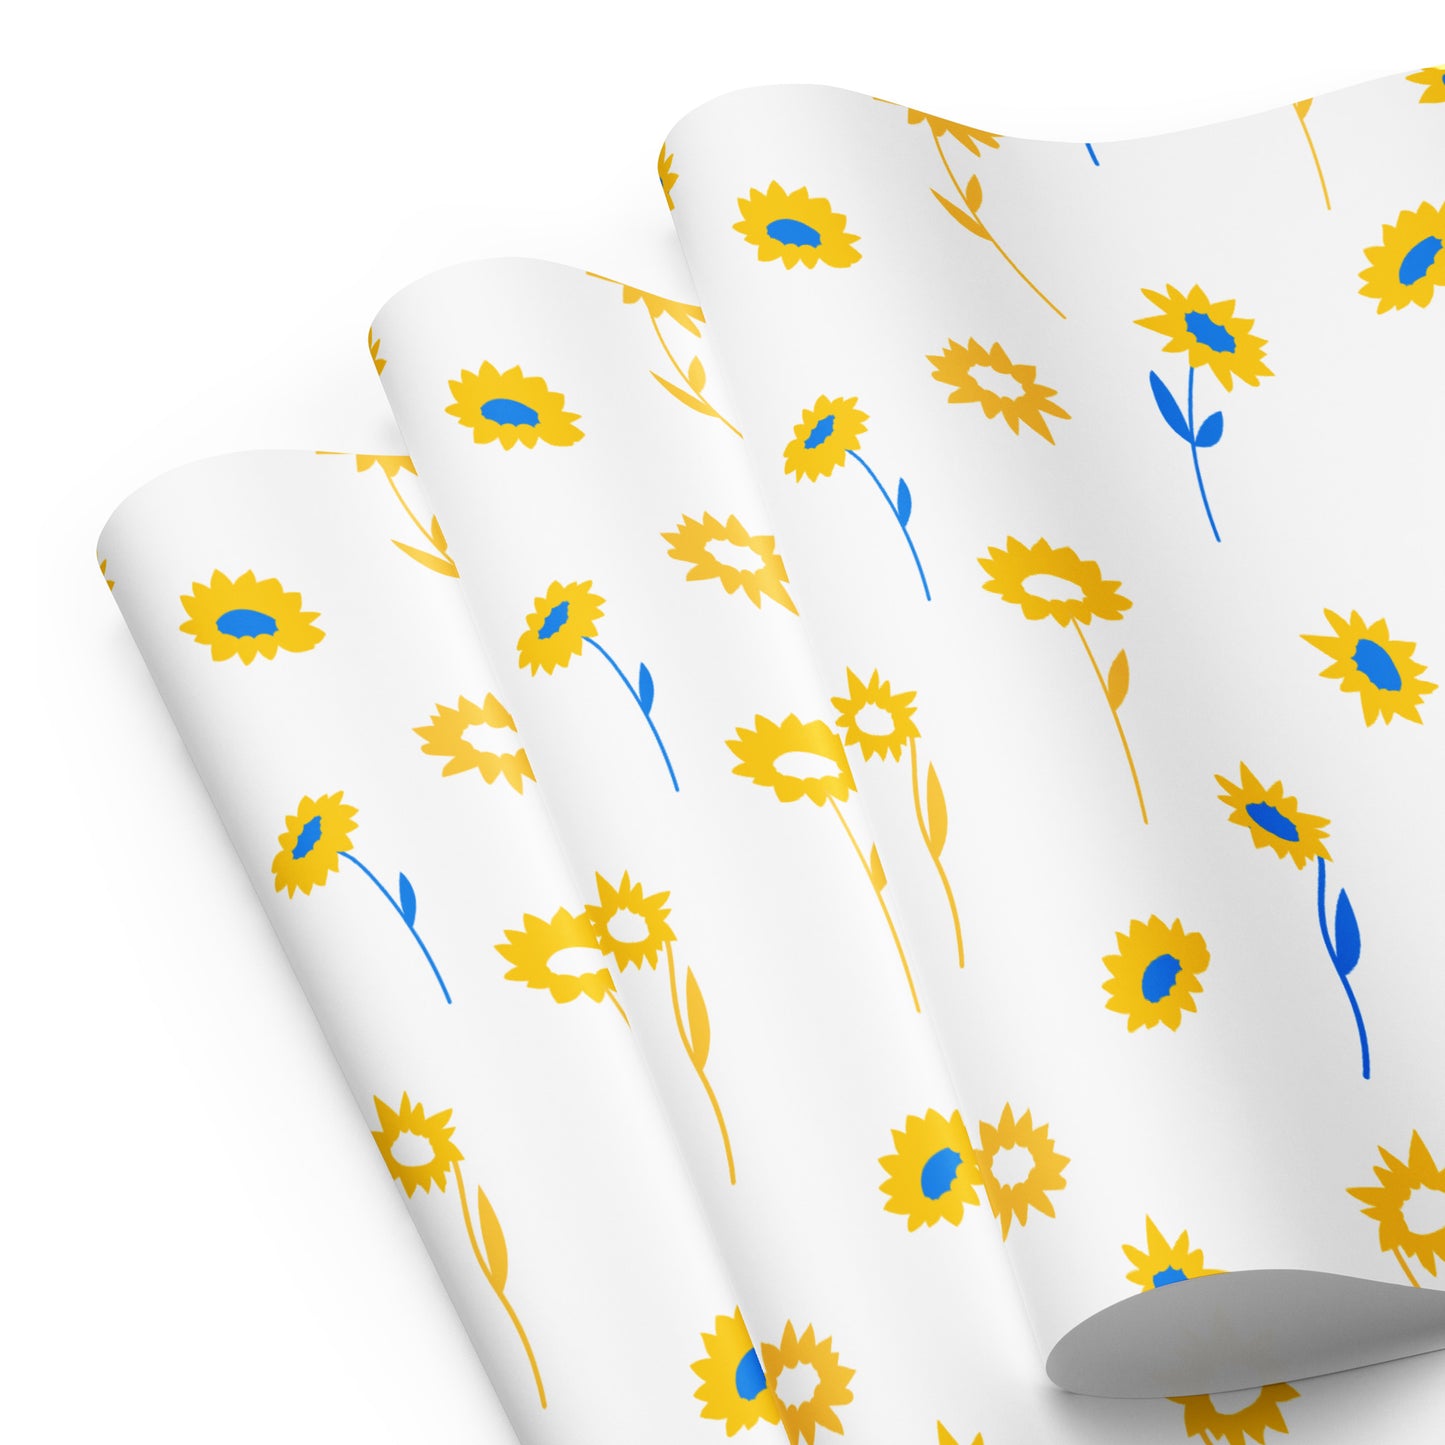 Wrapping paper with Yellow flowers